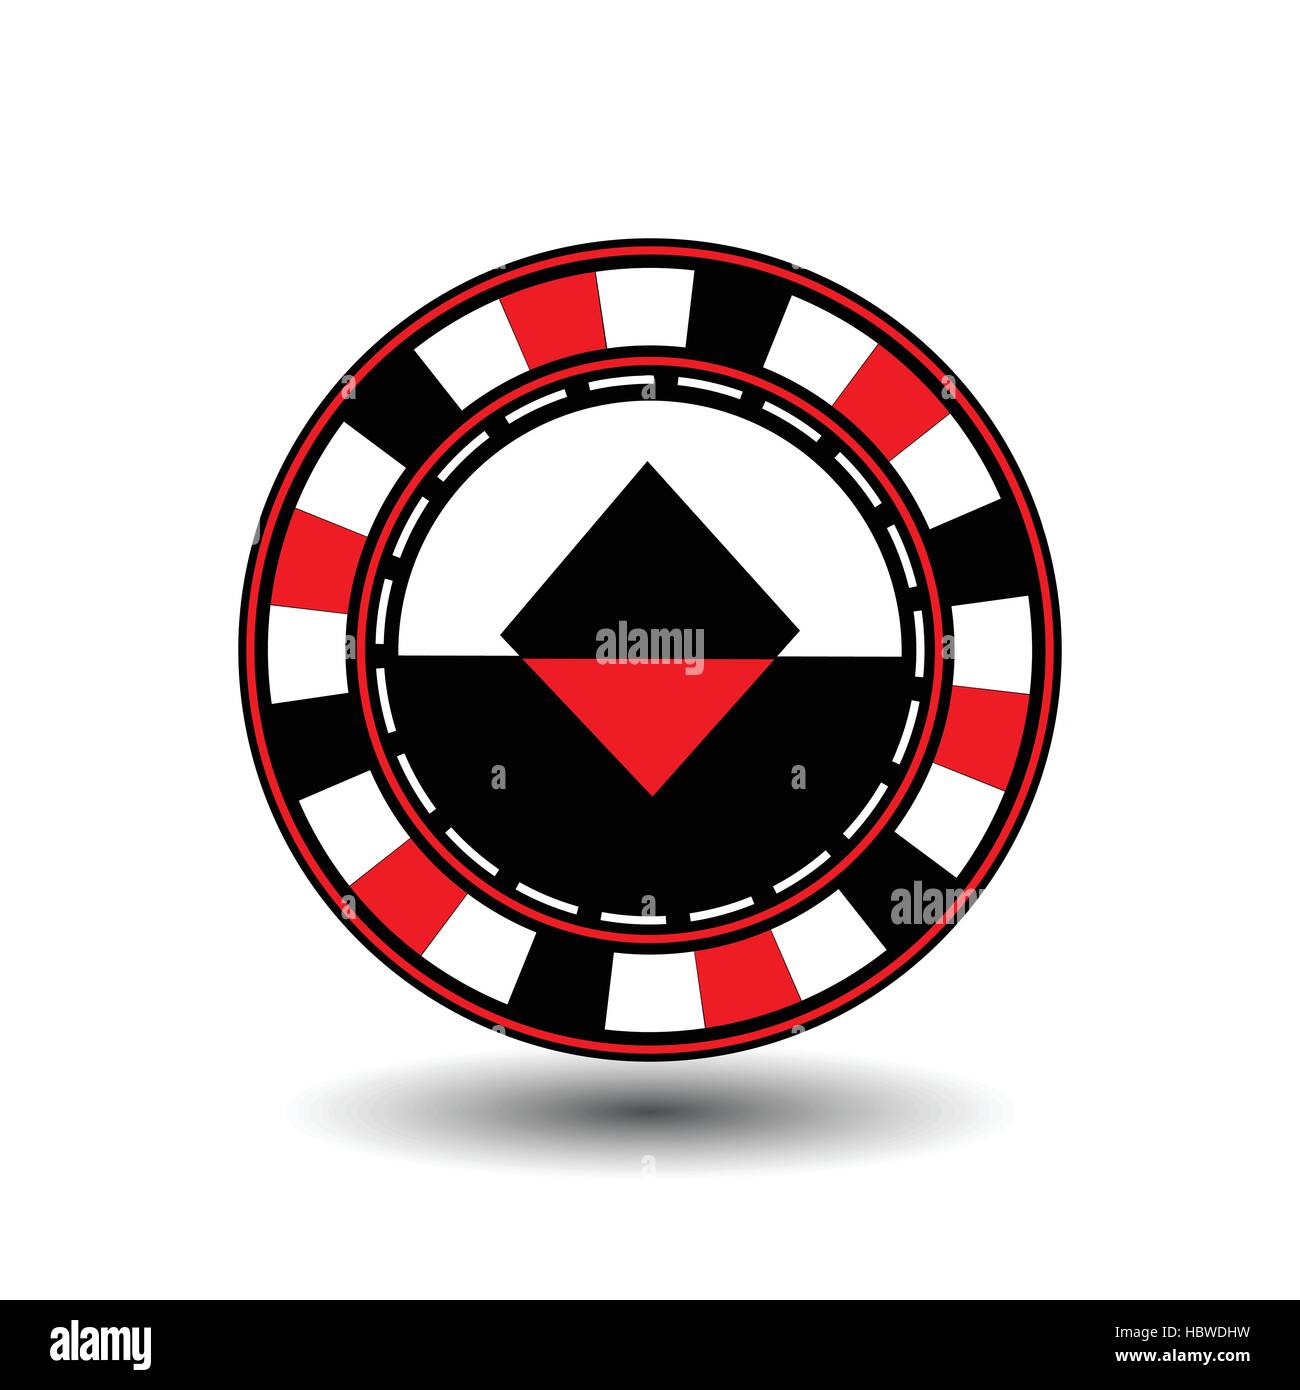 chips for poker red a suit diamond red black an icon on the white isolated background. illustration eps 10 vector. to spolzovat for the websites, desi Stock Vector